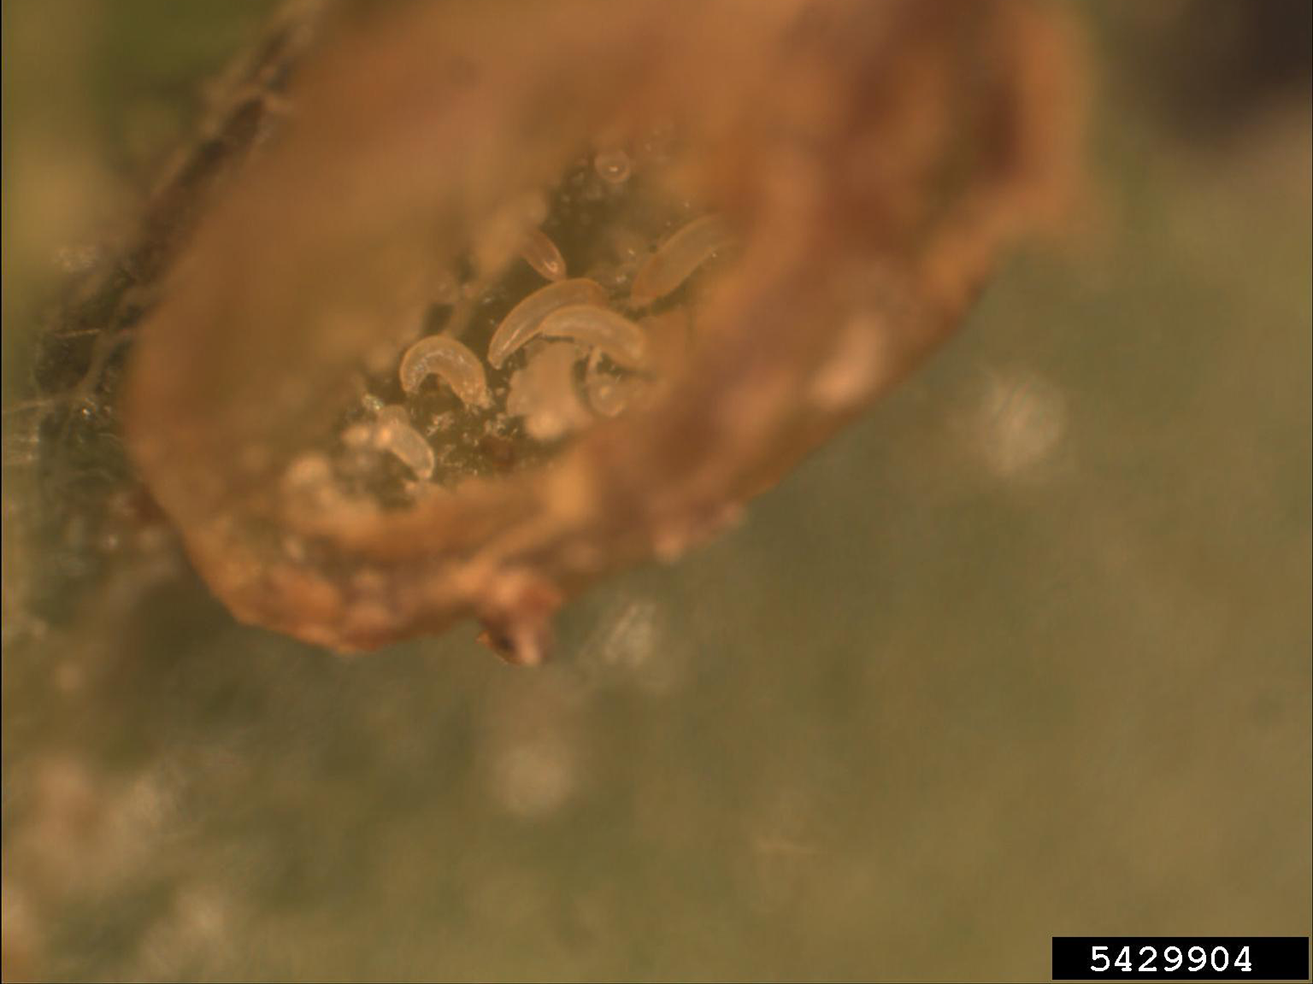 Magnified eriophyid mites inside a plant gall